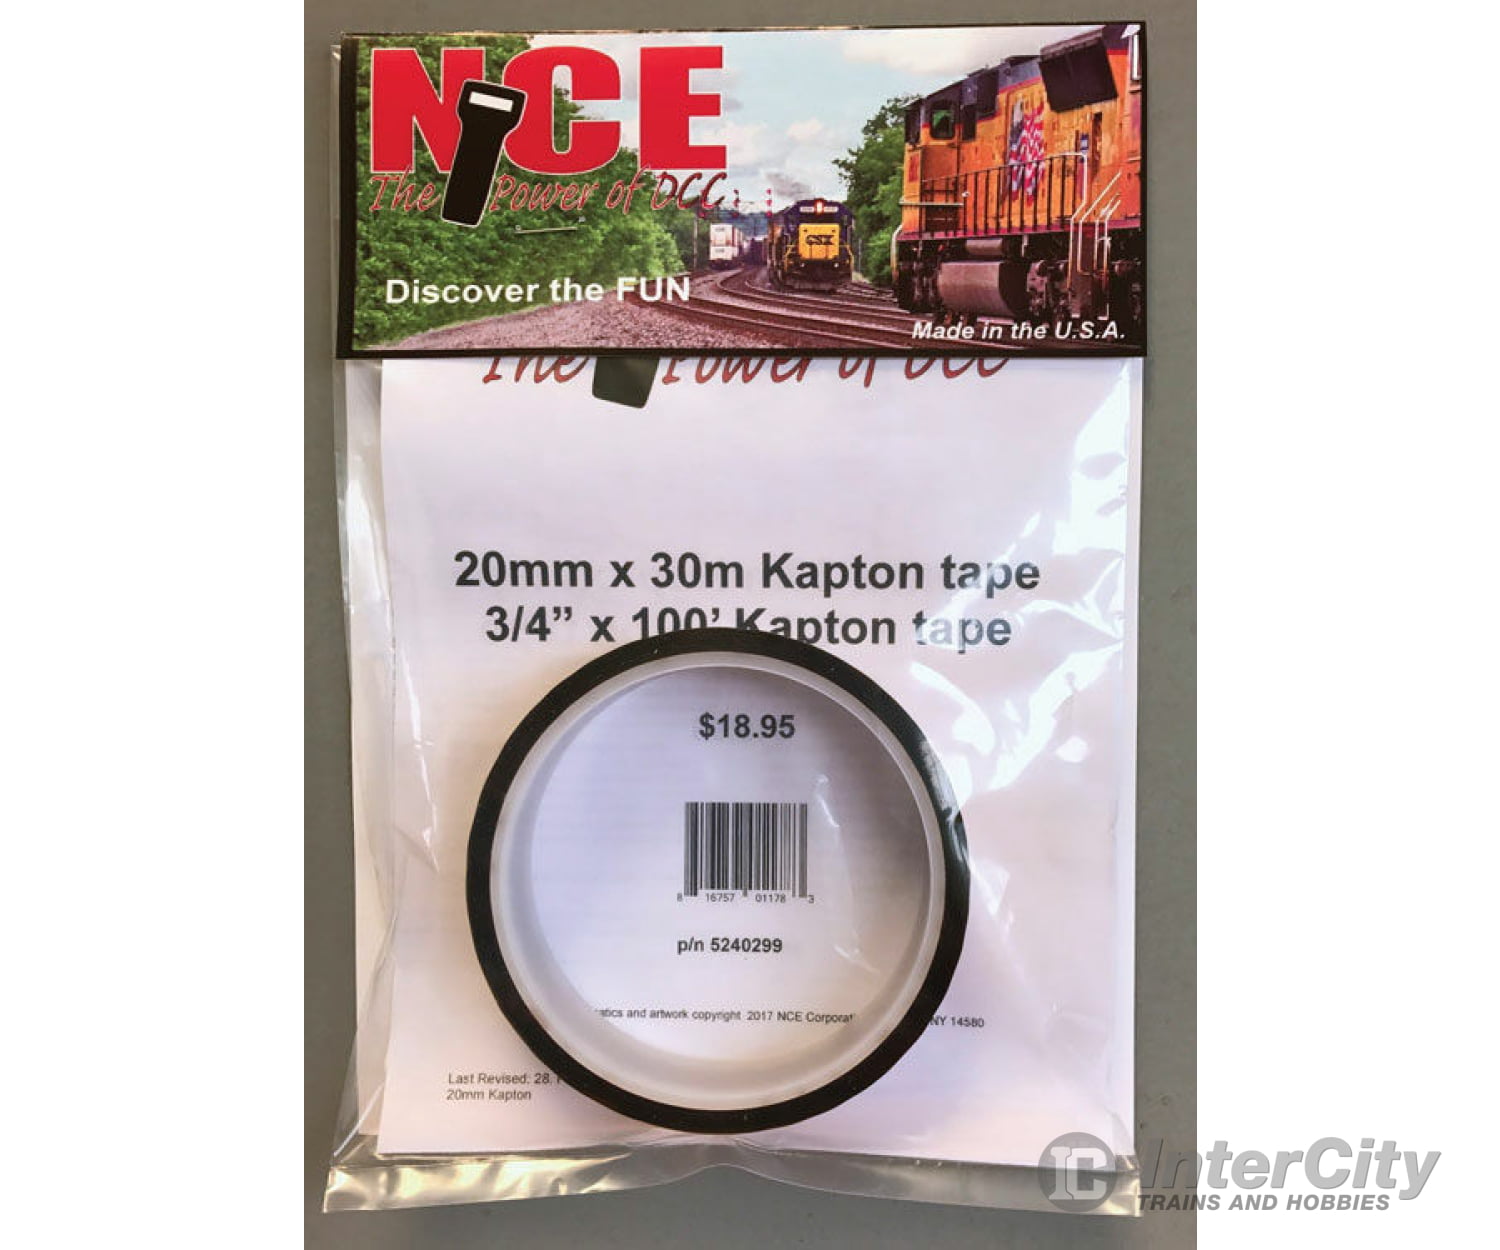 Nce 299 Kapton Tape - - 20Mm Wide 100’ Roll Dcc Accessories